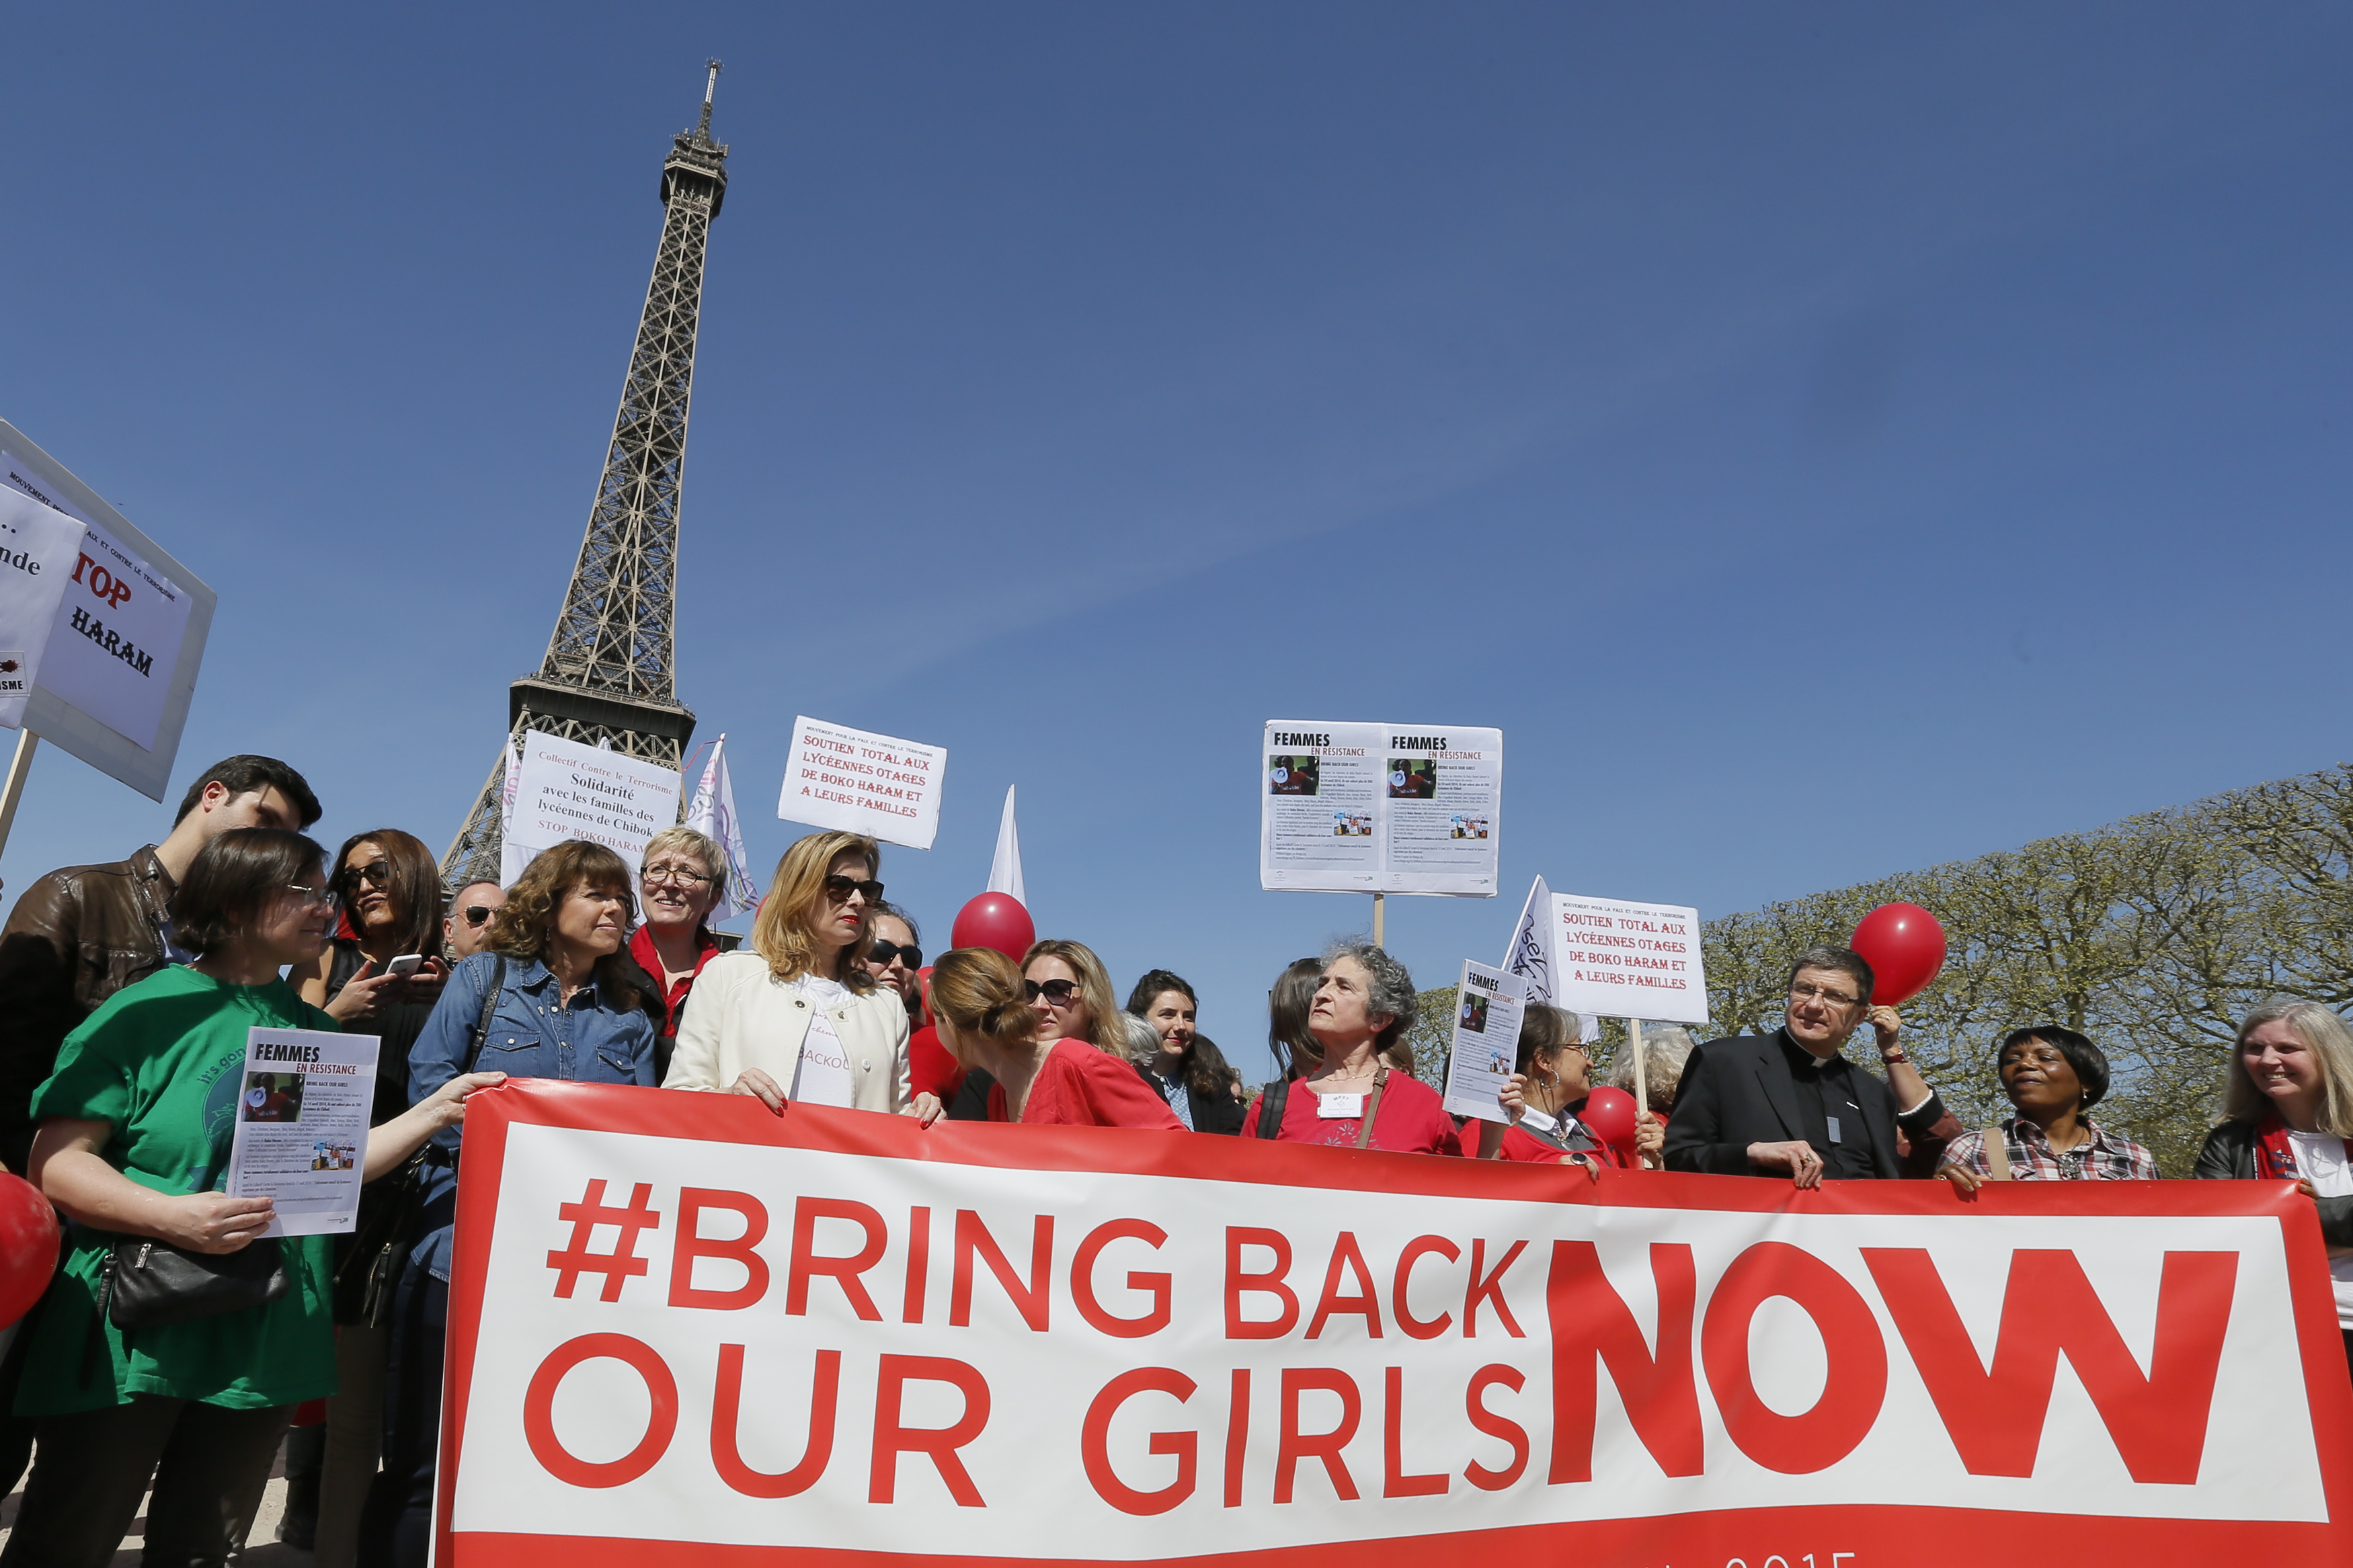 Former French first lady Valerie Trierweiler (3rdL) attends a gathering "Bring Back Our Girls" near the Eiffel Tower in Paris on April 14, 2015 to mark one year since more than 200 schoolgirls were kidnapped in Chibok, north-eastern Nigeria, by Nigerian Islamist rebel group Boko Haram.